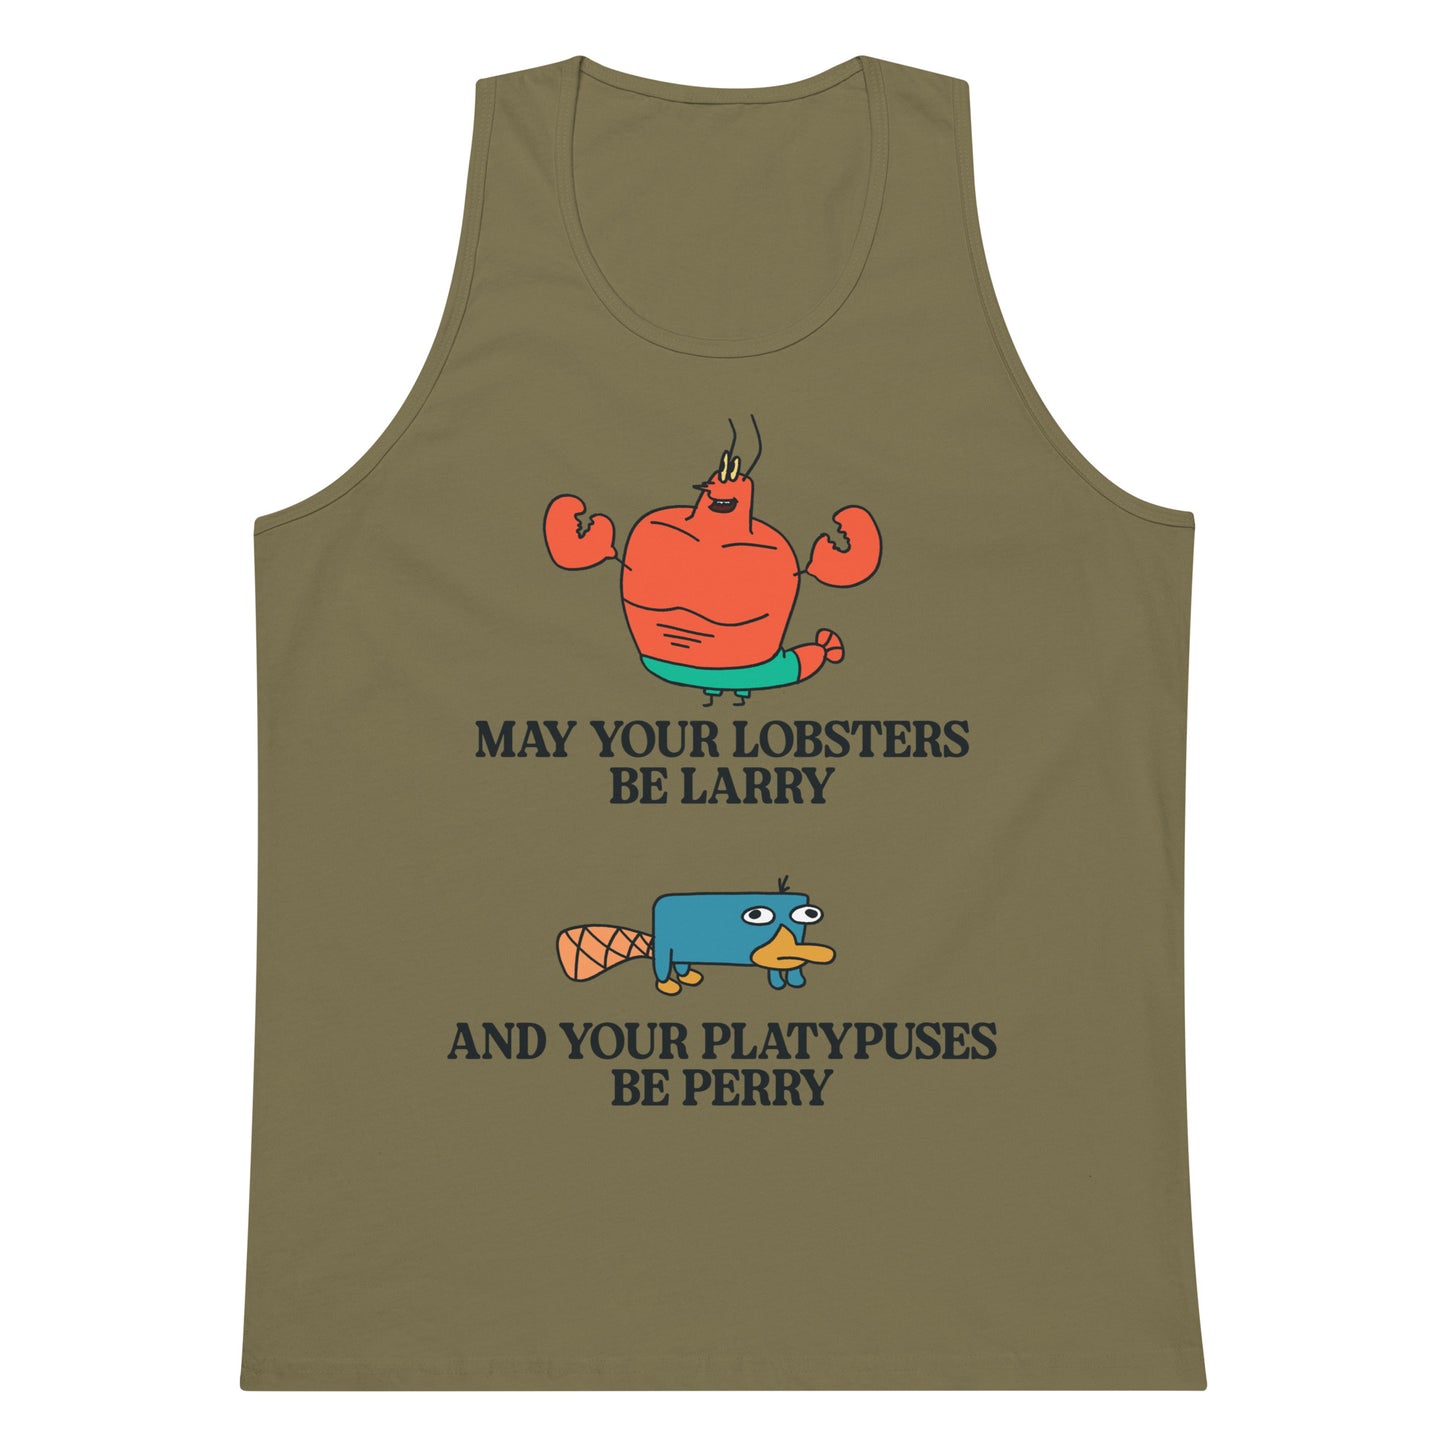 Lobsters Be Larry Platypuses Be Perry tank top